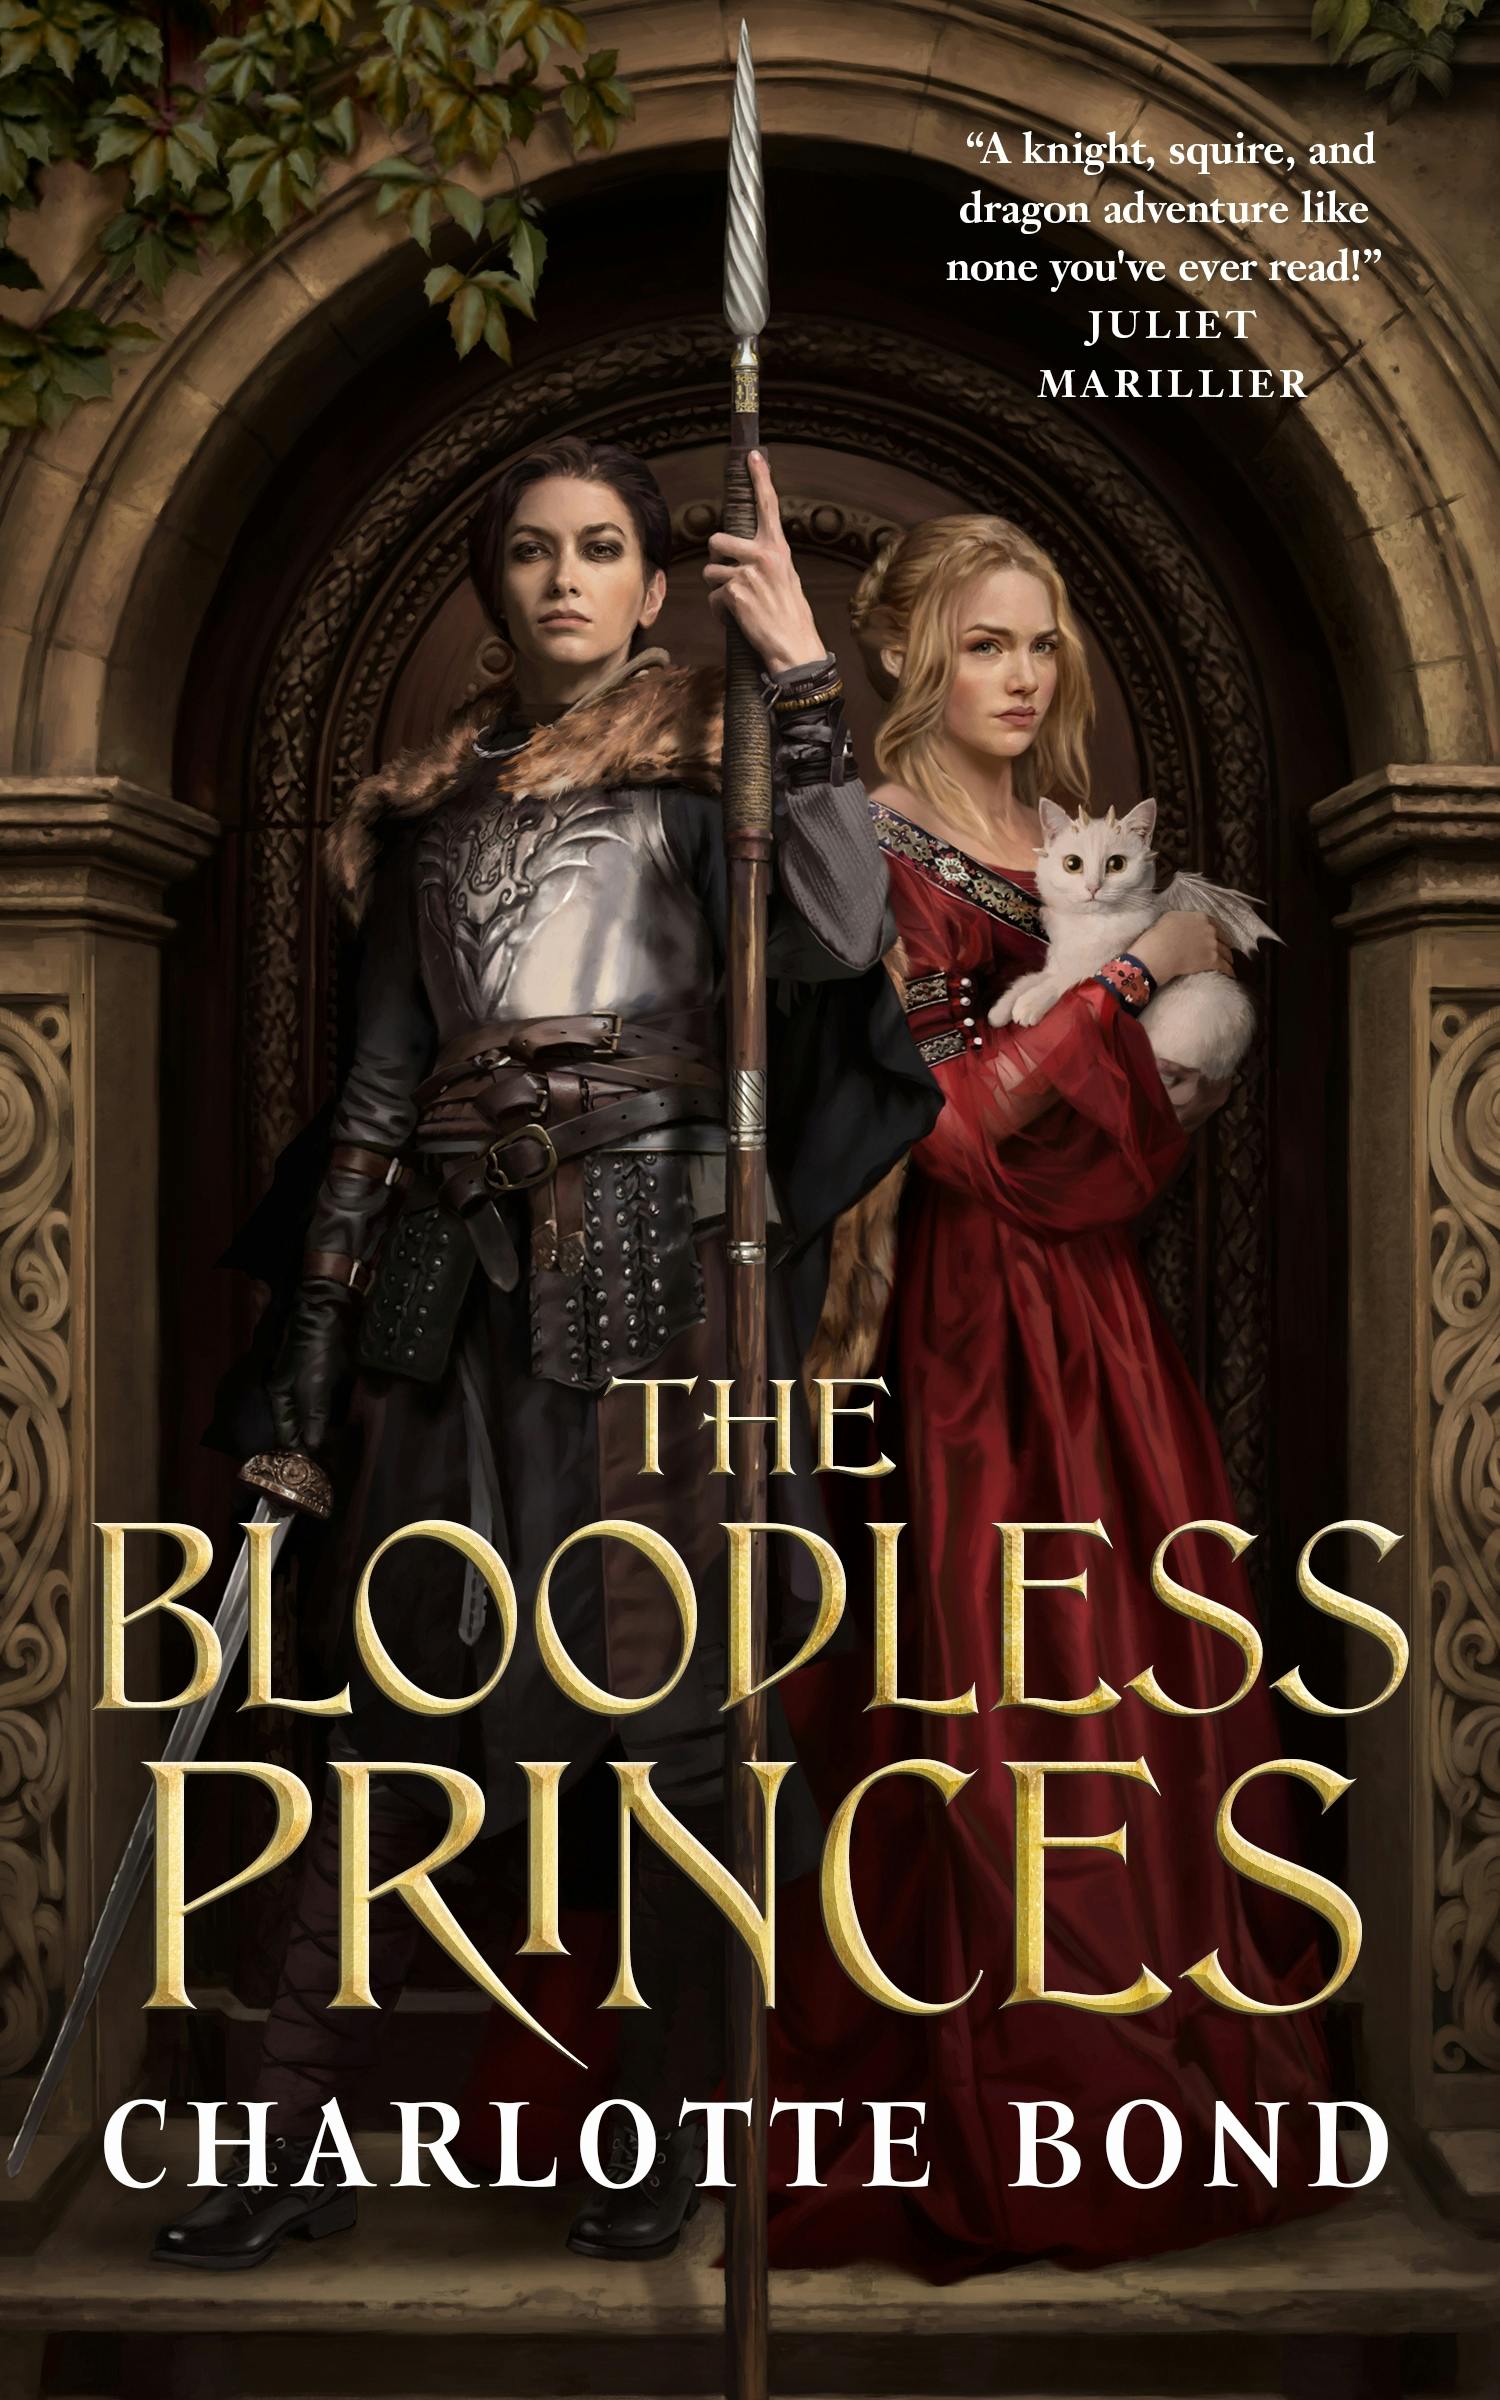 Cover for the book titled as: The Bloodless Princes